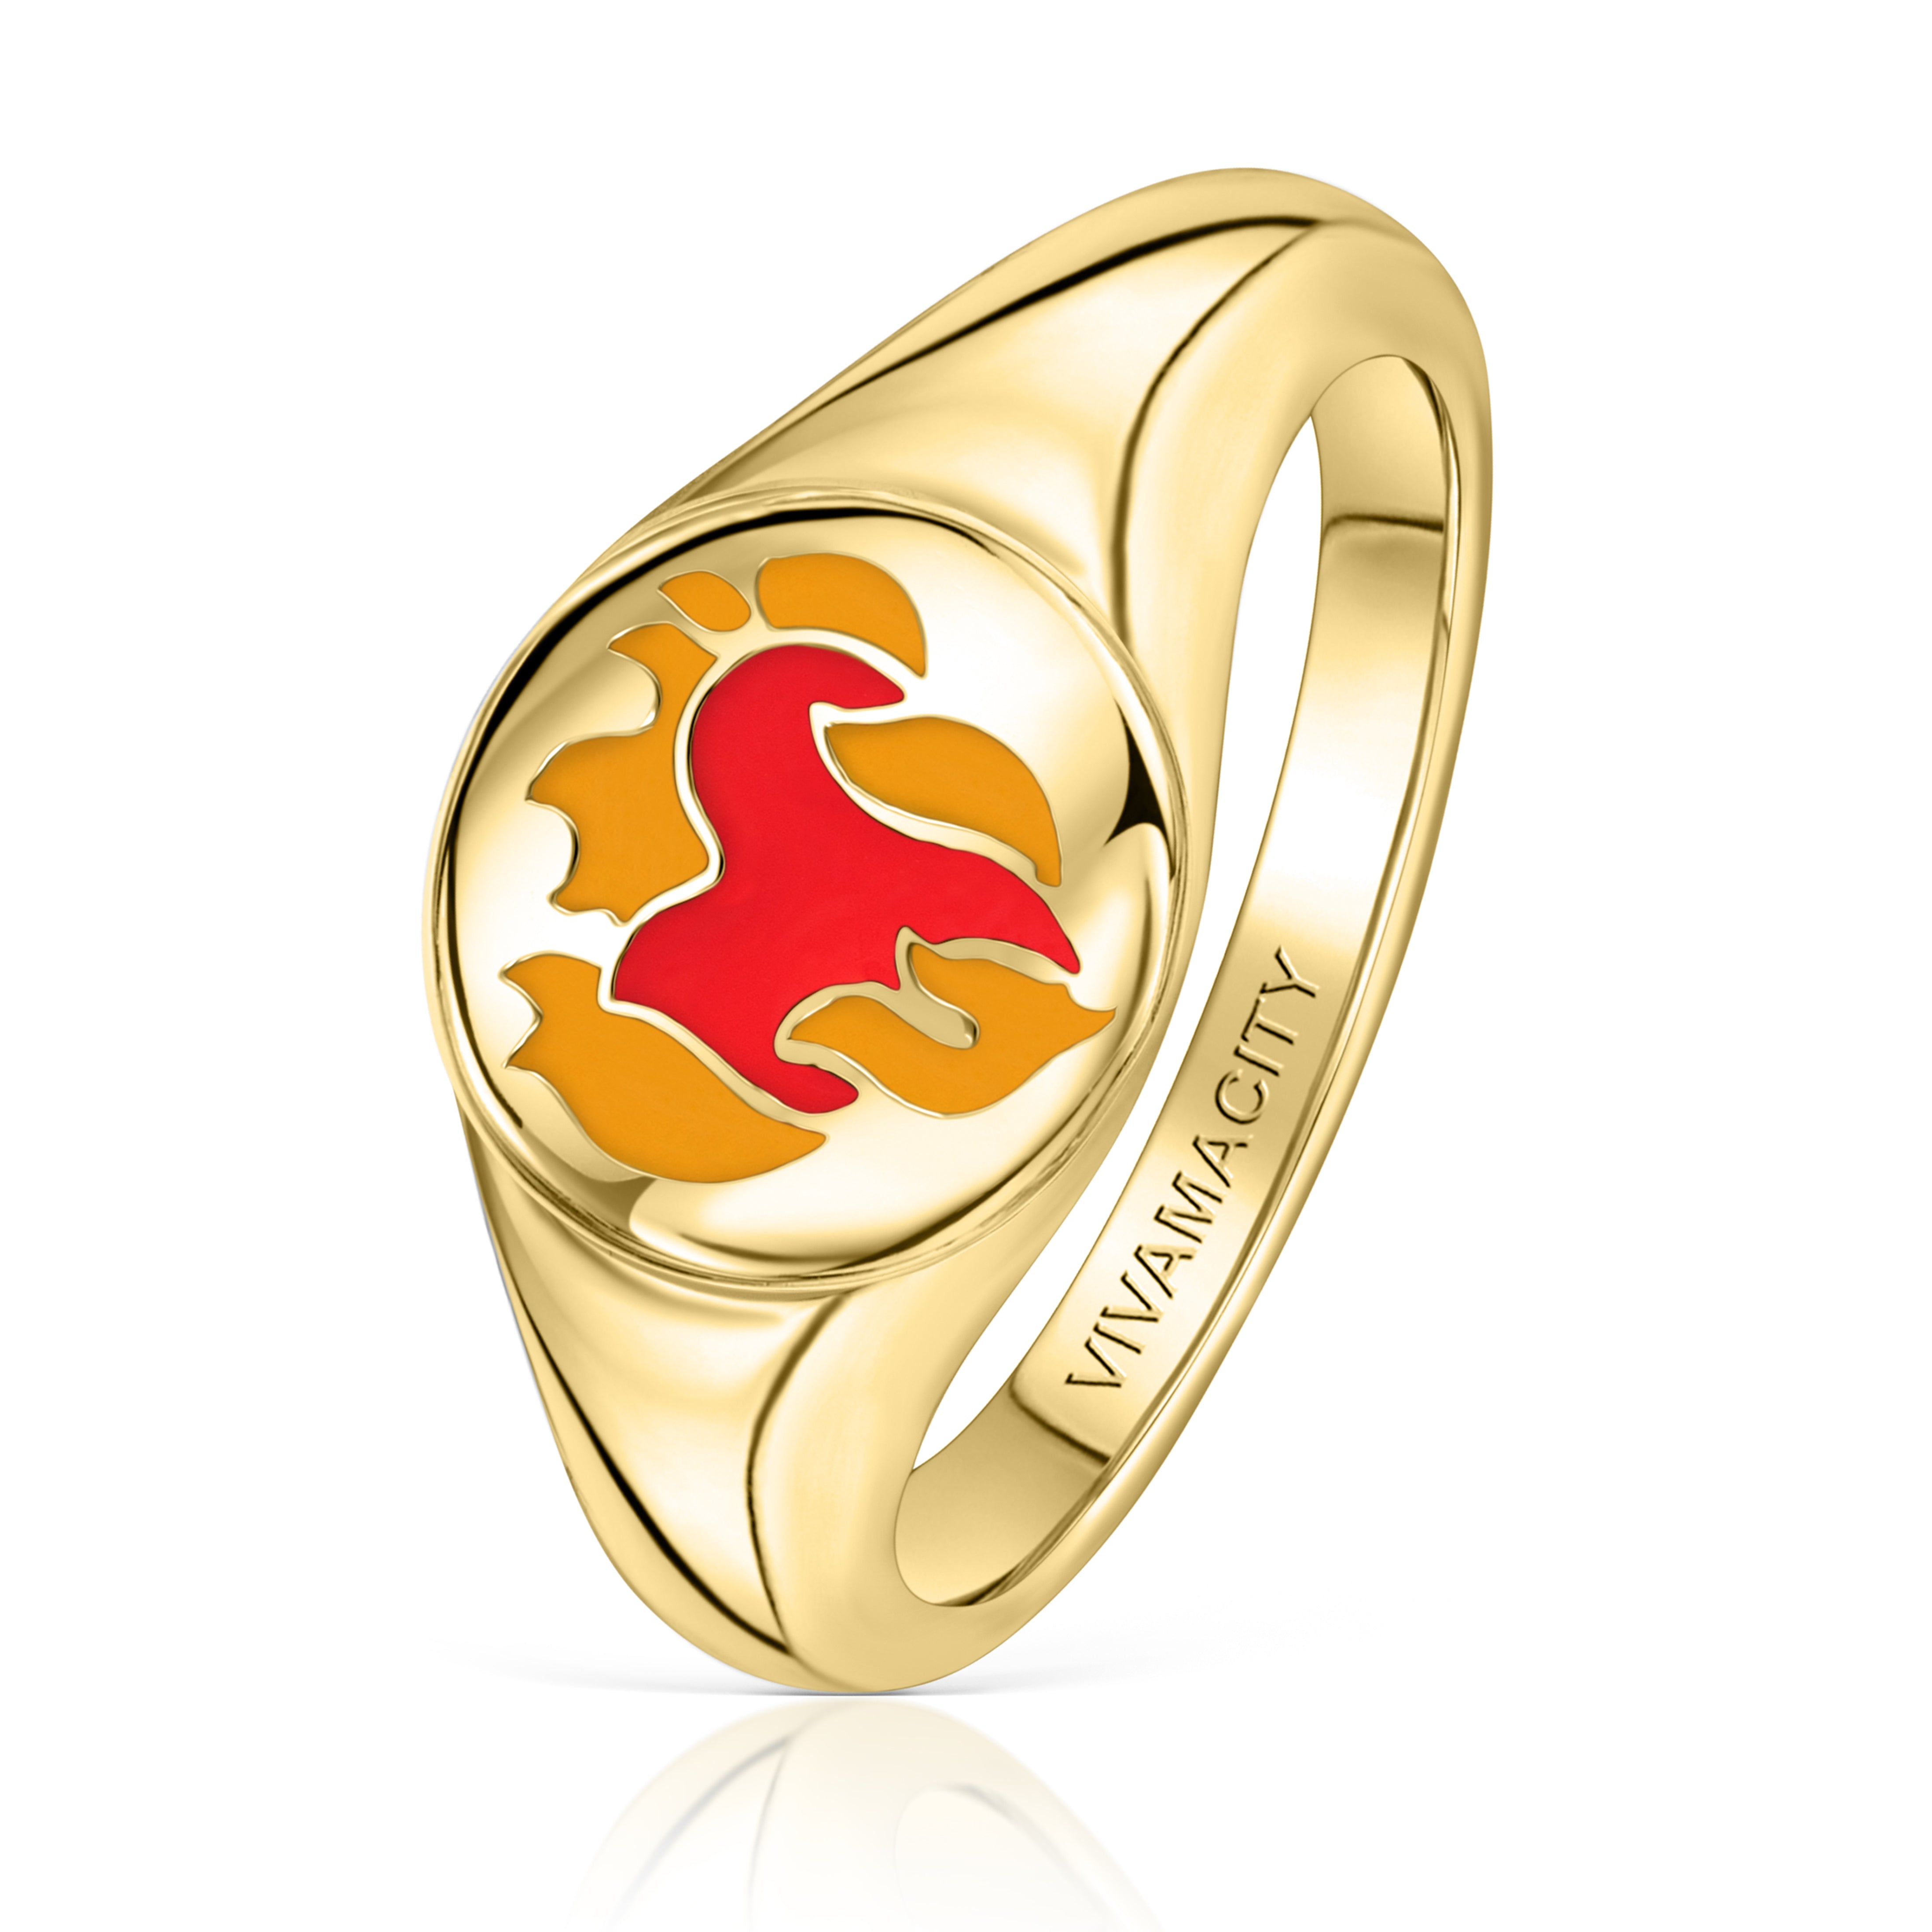 Twin Flames Ring